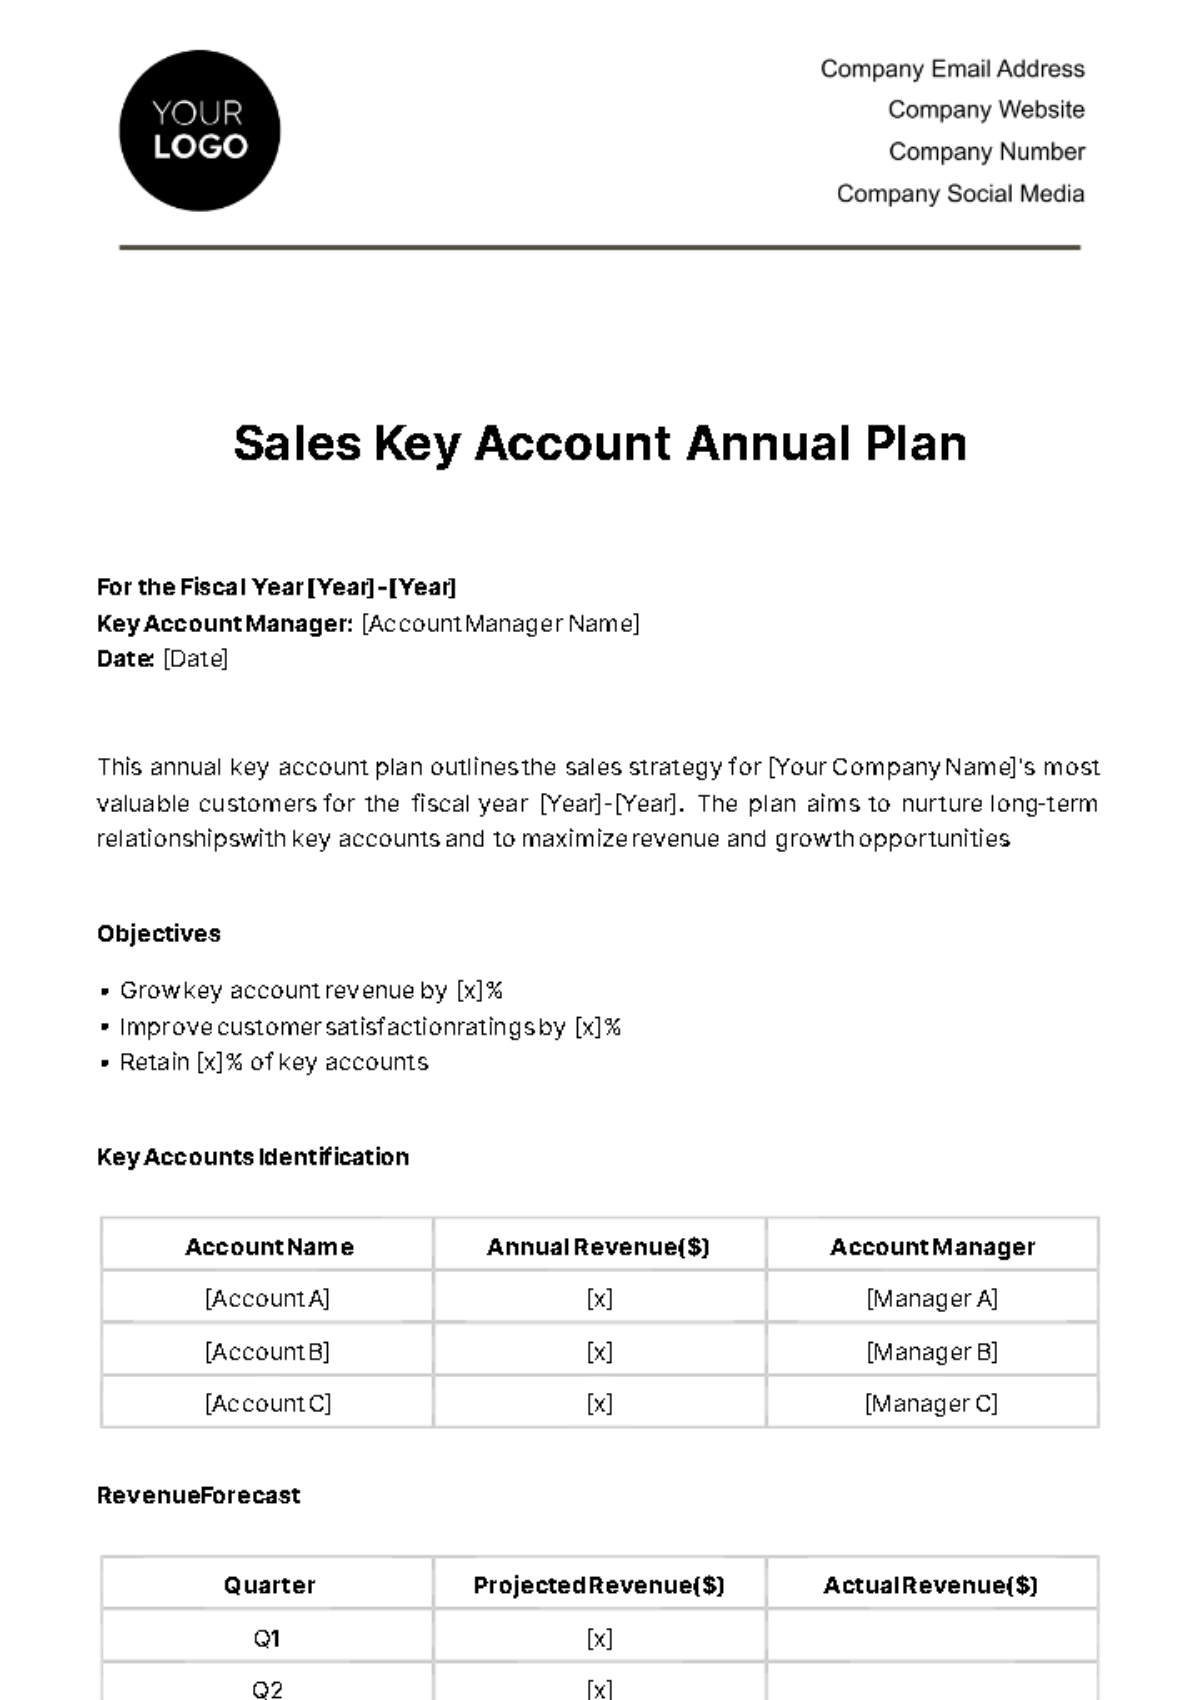 Free Sales Key Account Annual Plan Template